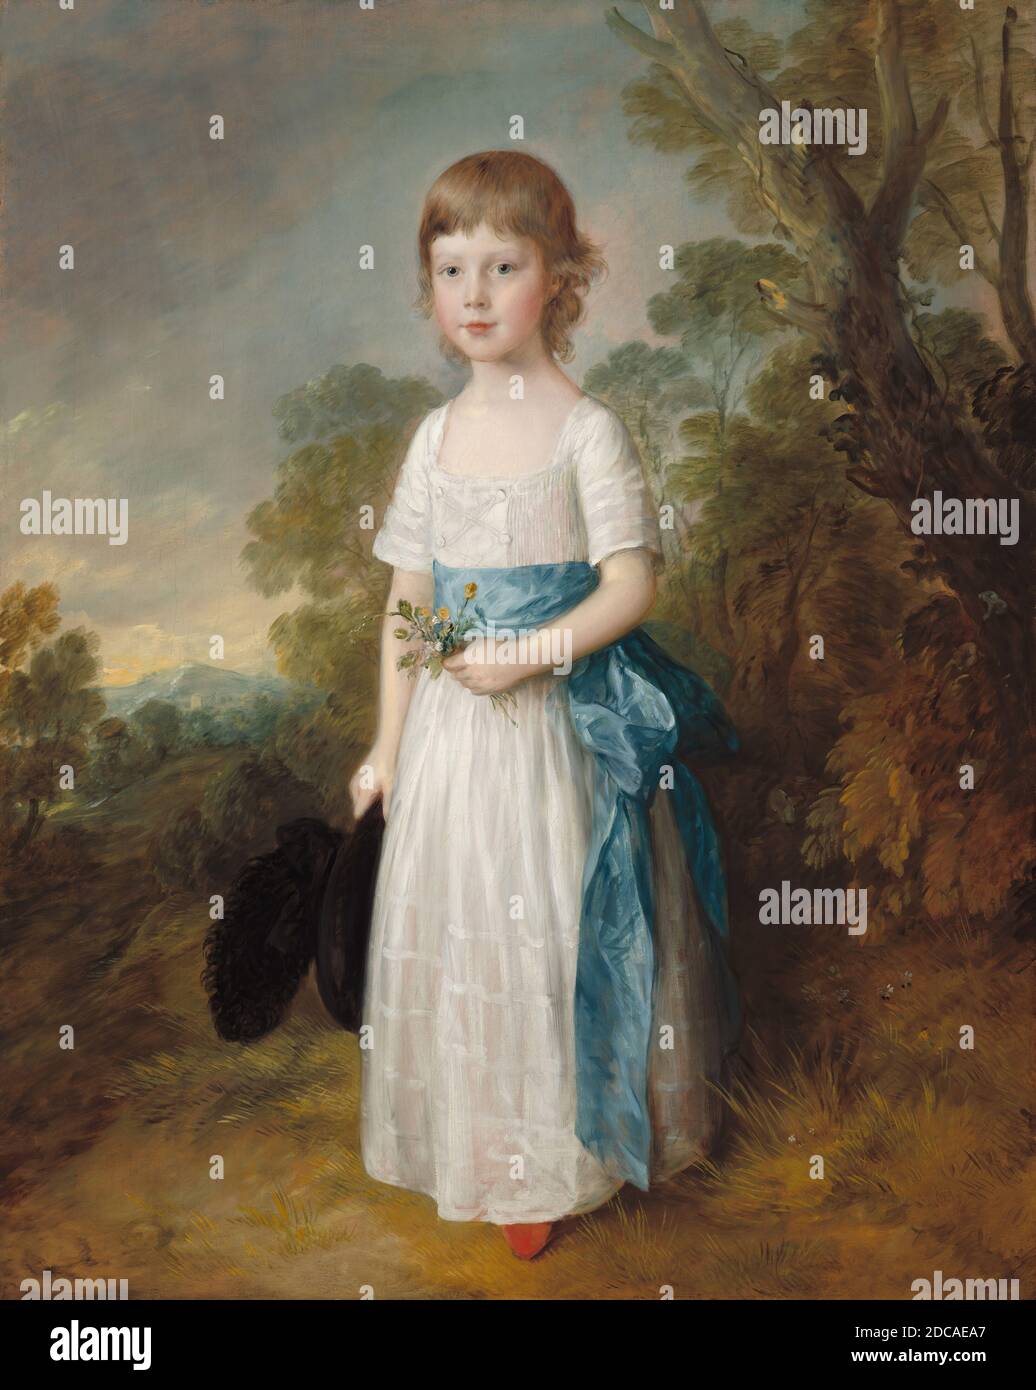 Thomas Gainsborough, (artist), British, 1727 - 1788, Master John Heathcote, c. 1771/1772, oil on canvas, overall: 127 x 101.2 cm (50 x 39 13/16 in.), framed: 159.4 x 133.3 cm (62 3/4 x 52 1/2 in.), Given in memory of Governor Alvan T. Fuller by The Fuller Foundation, Inc Stock Photo